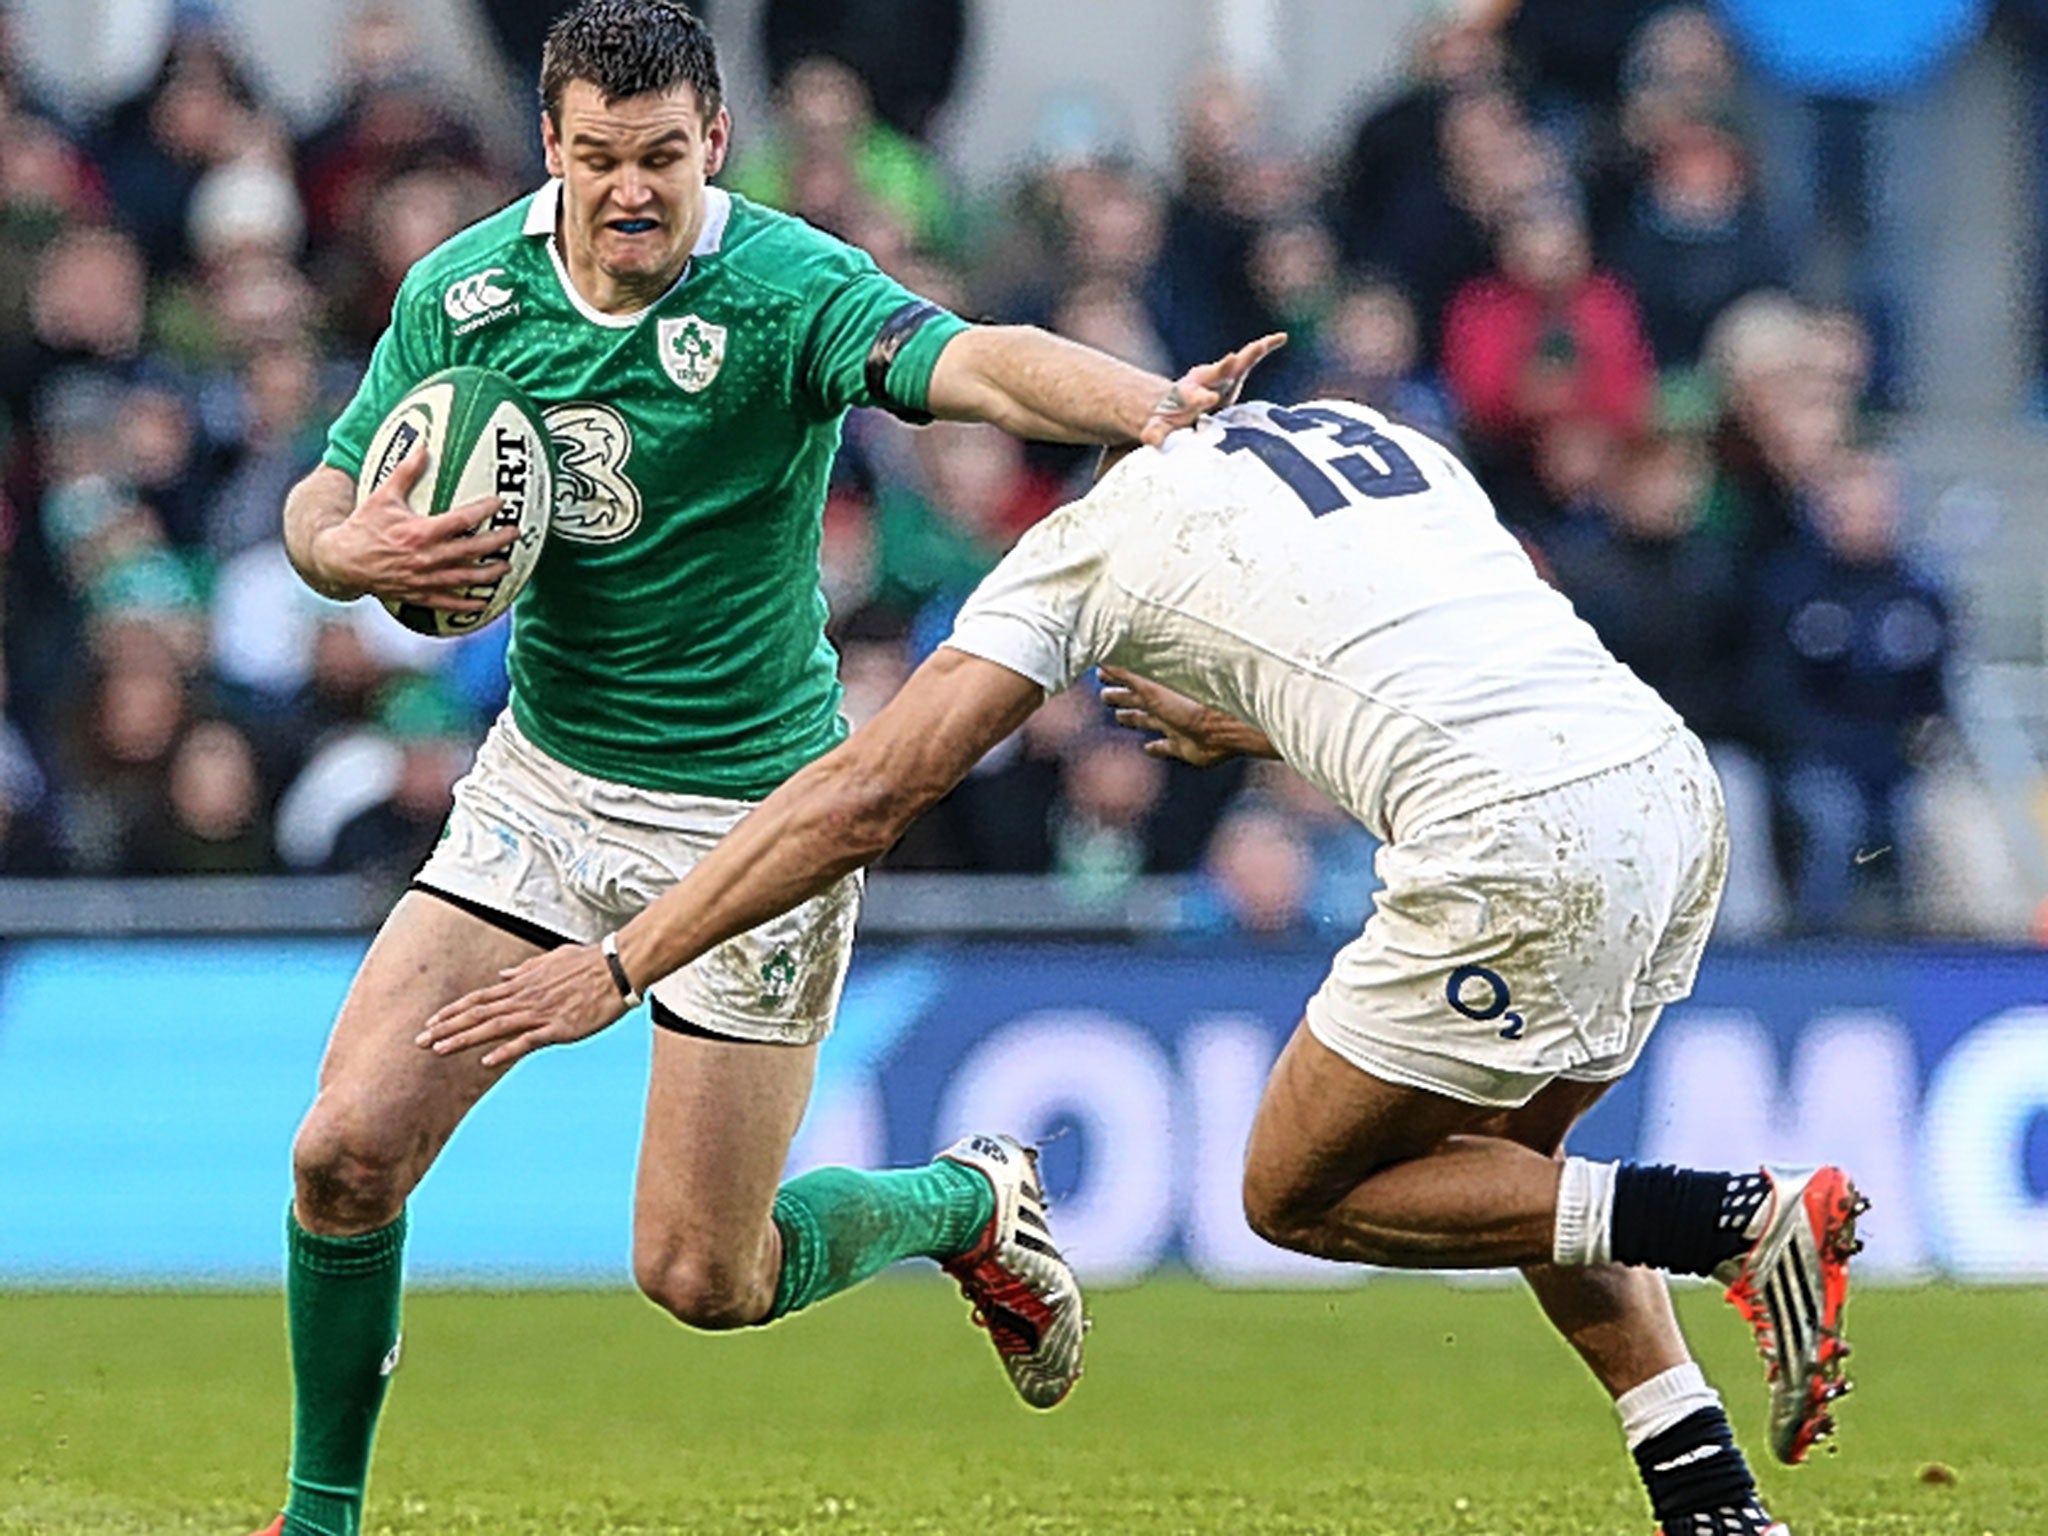 Jonny Sexton fends off a challenge against England. The Irishman is vulnerable when forced to tackle